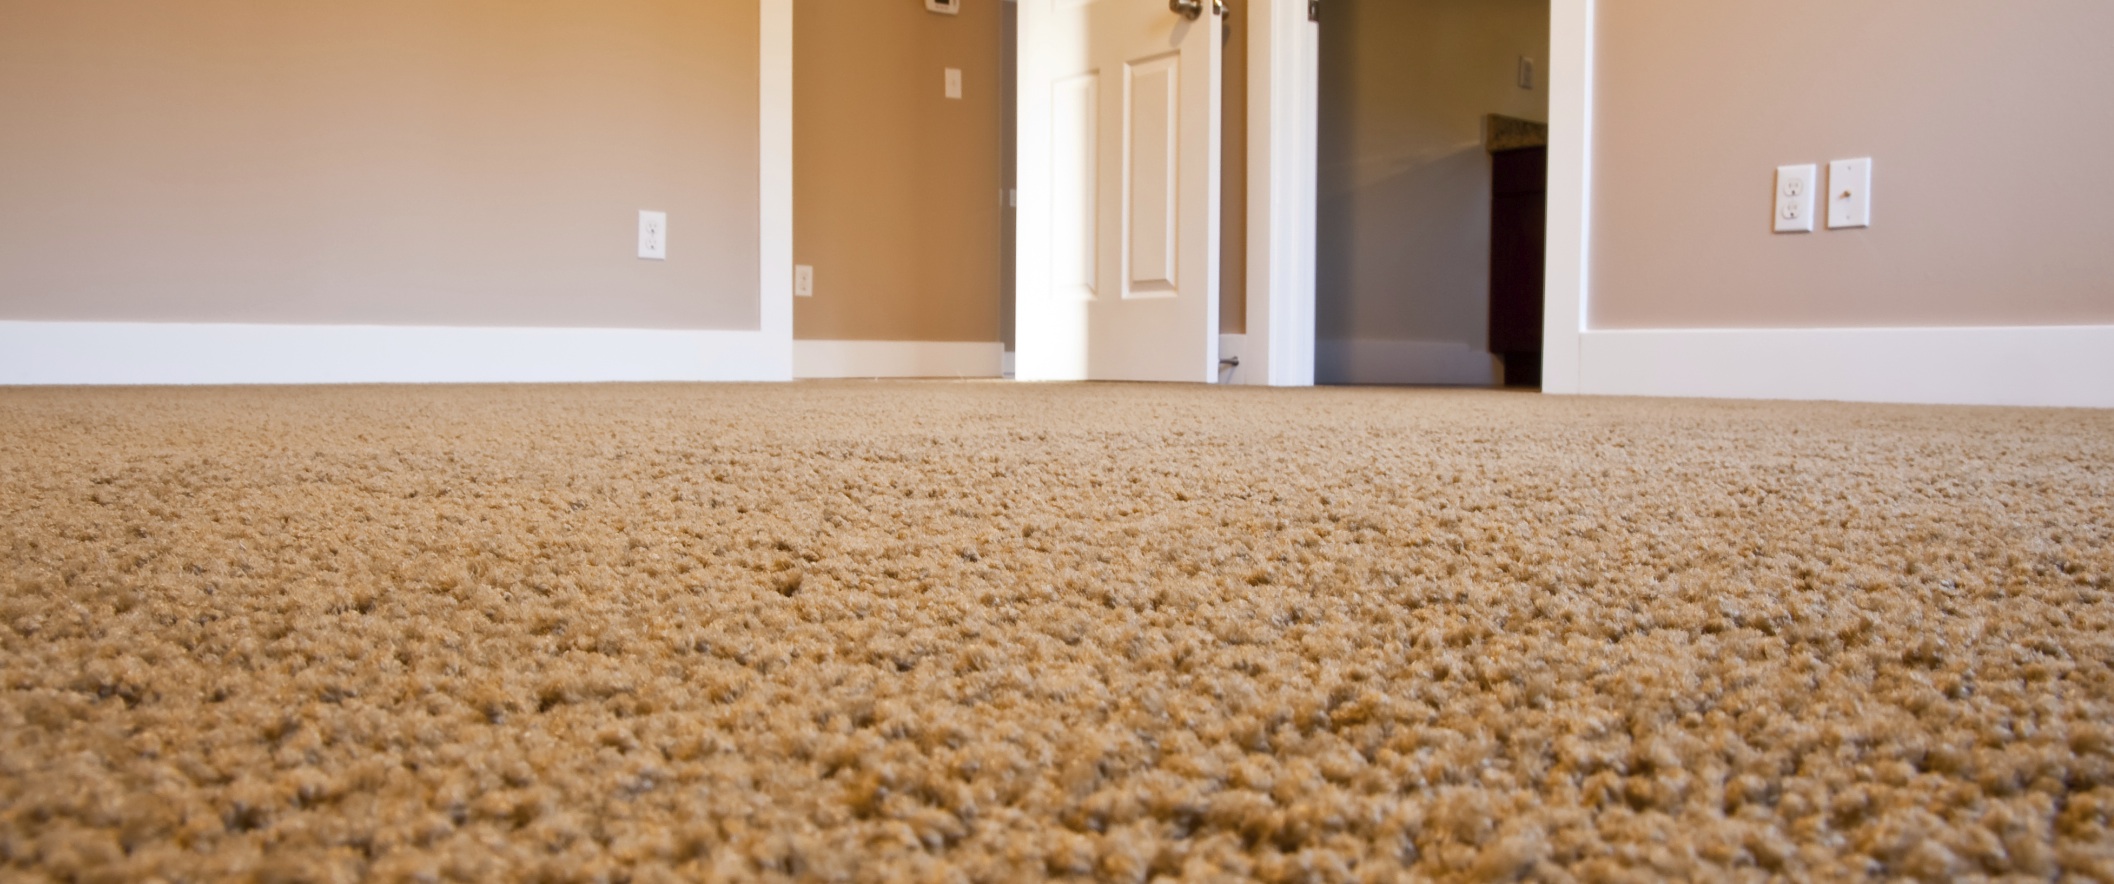 Why use a professional carpet cleaning service?